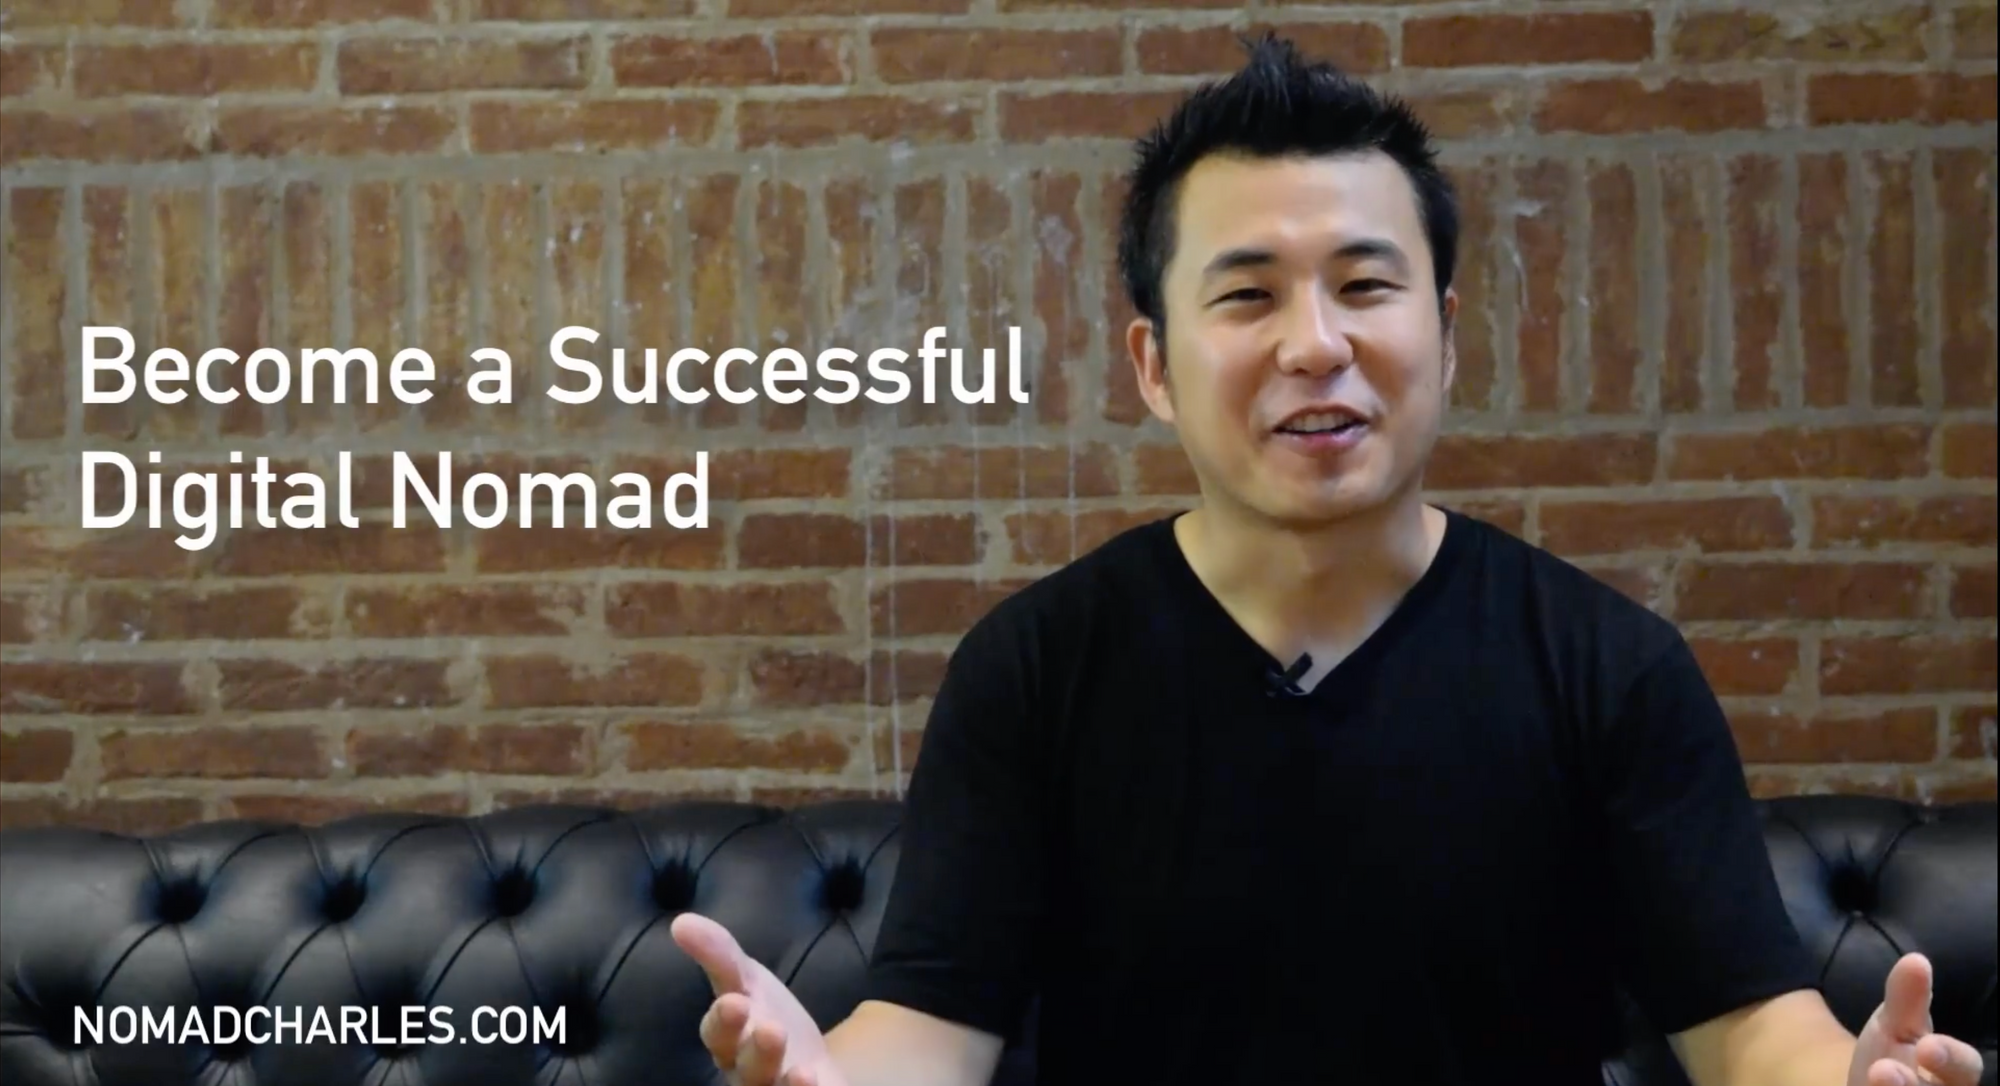 How to Become a Successful Digital Nomad: The Complete course